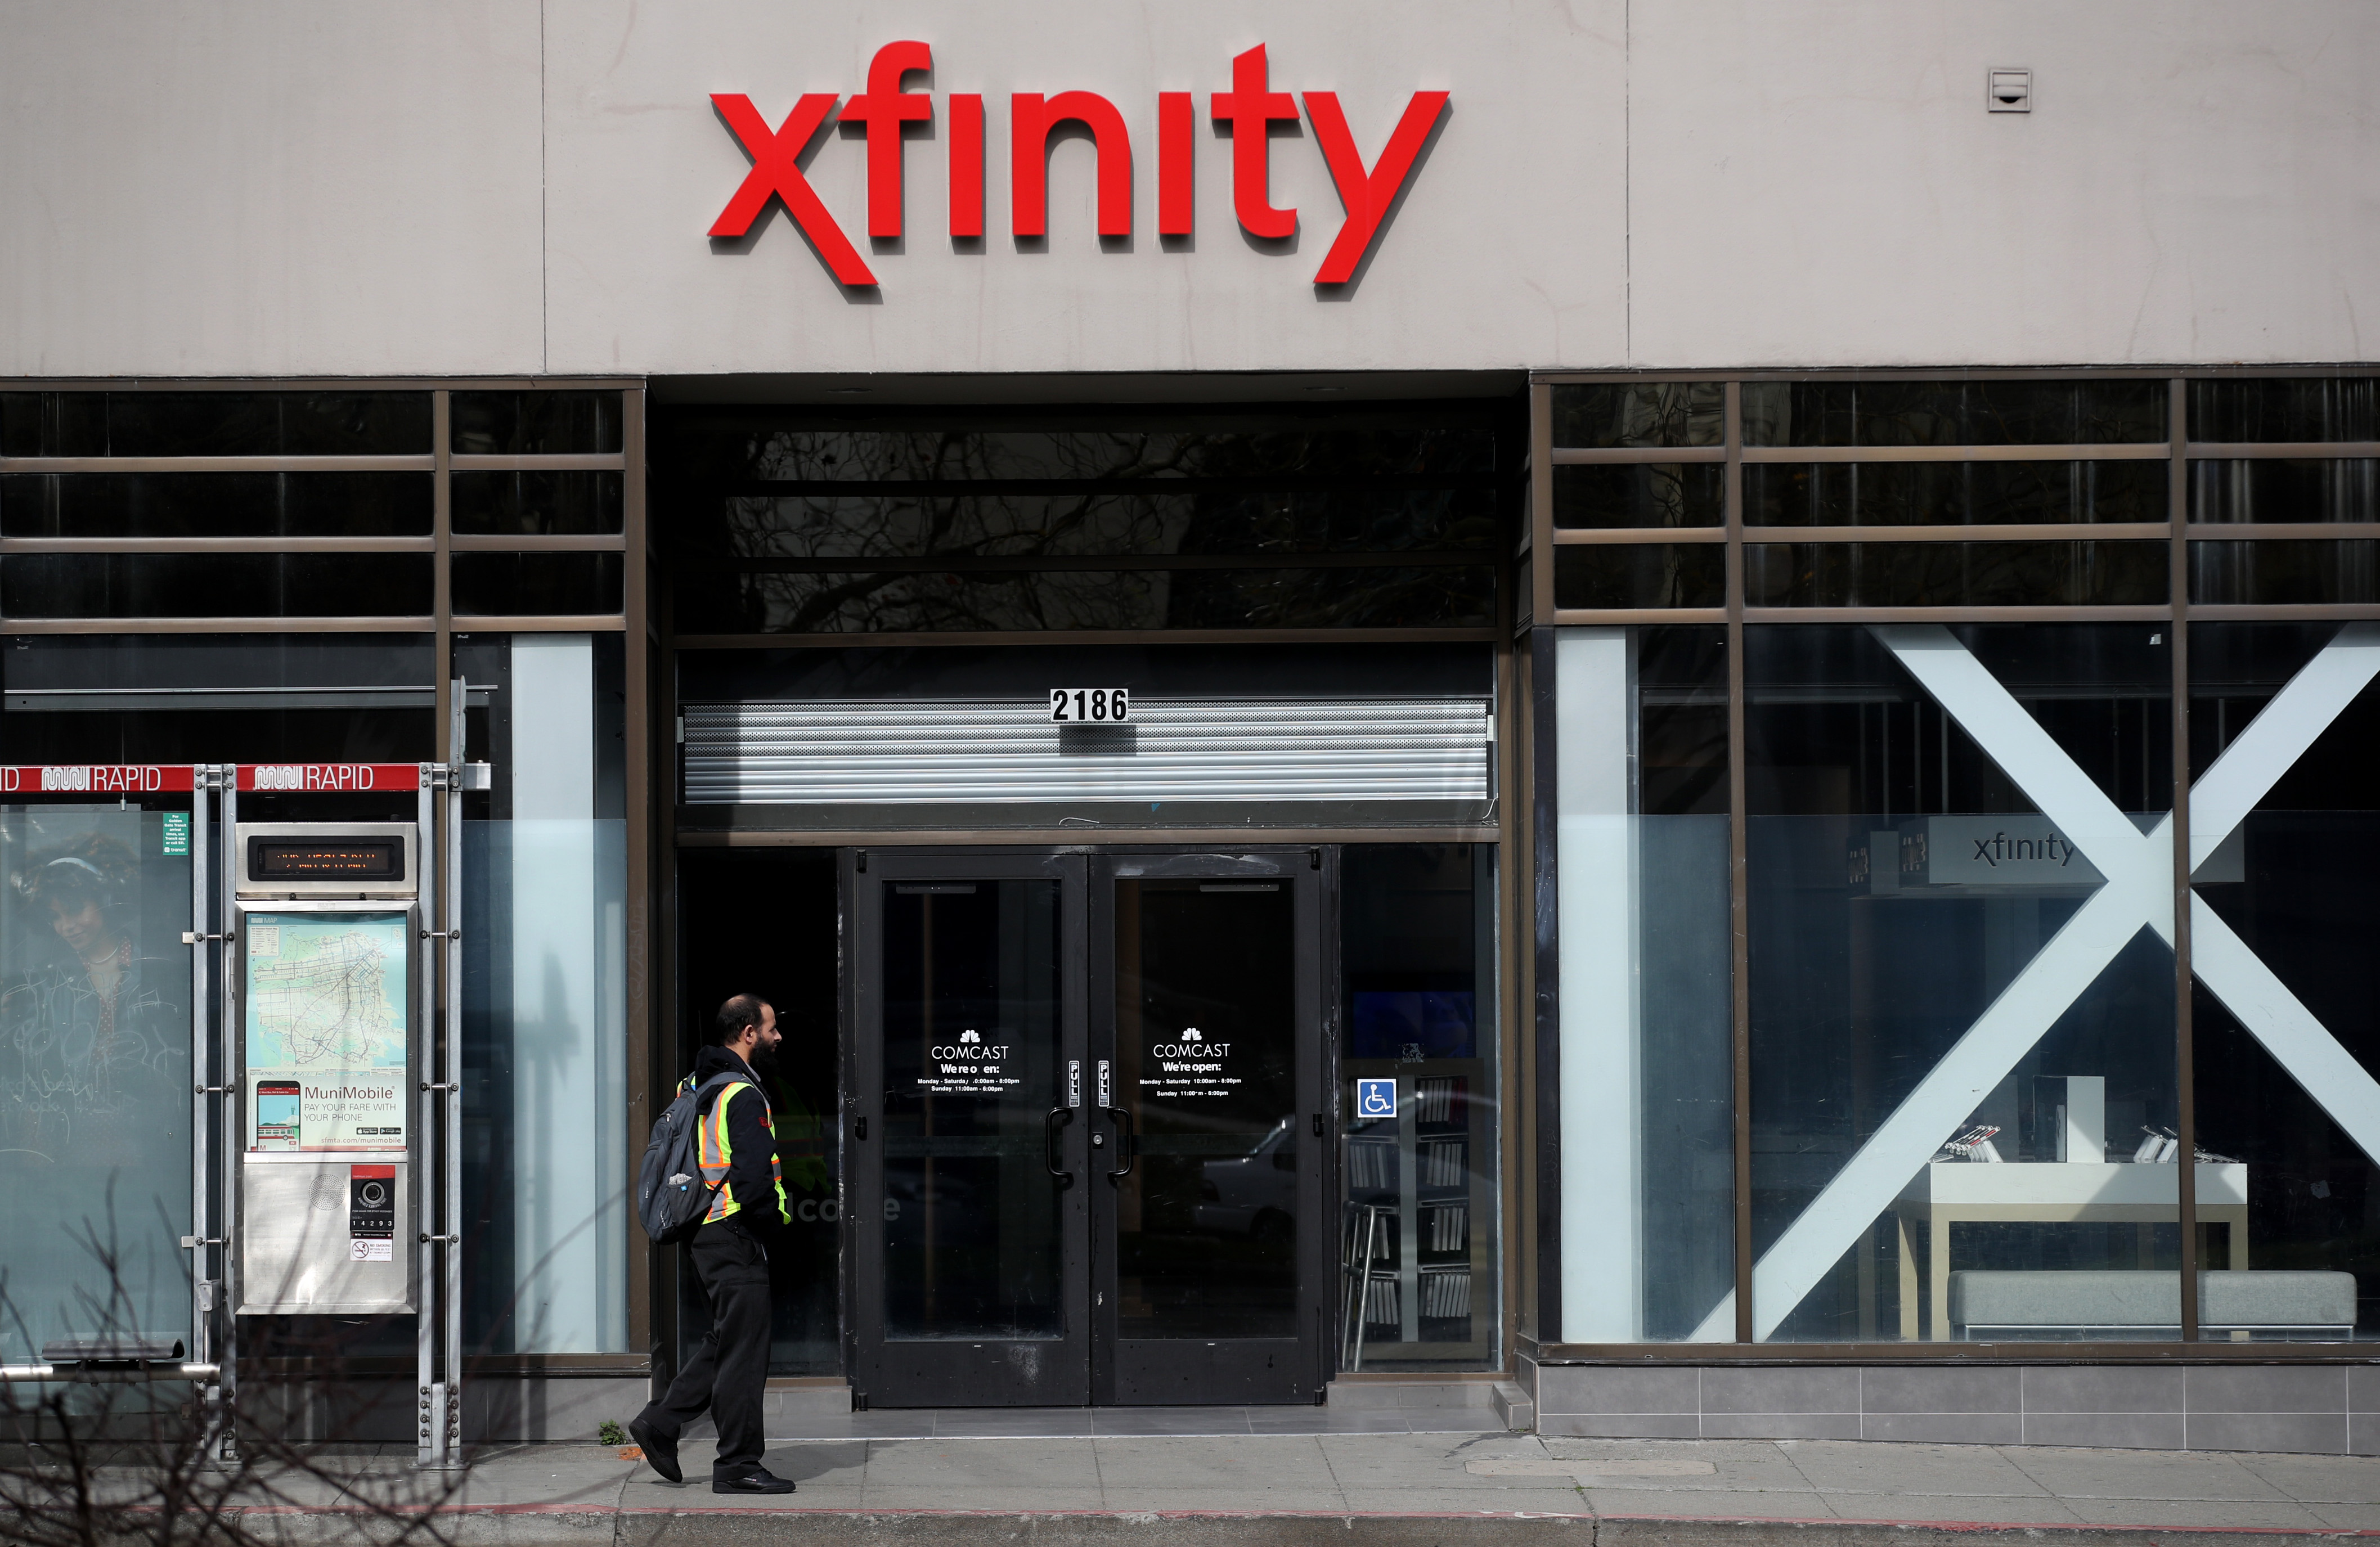 xfinity-mobile-says-its-new-data-plans-include-5g-at-no-extra-cost